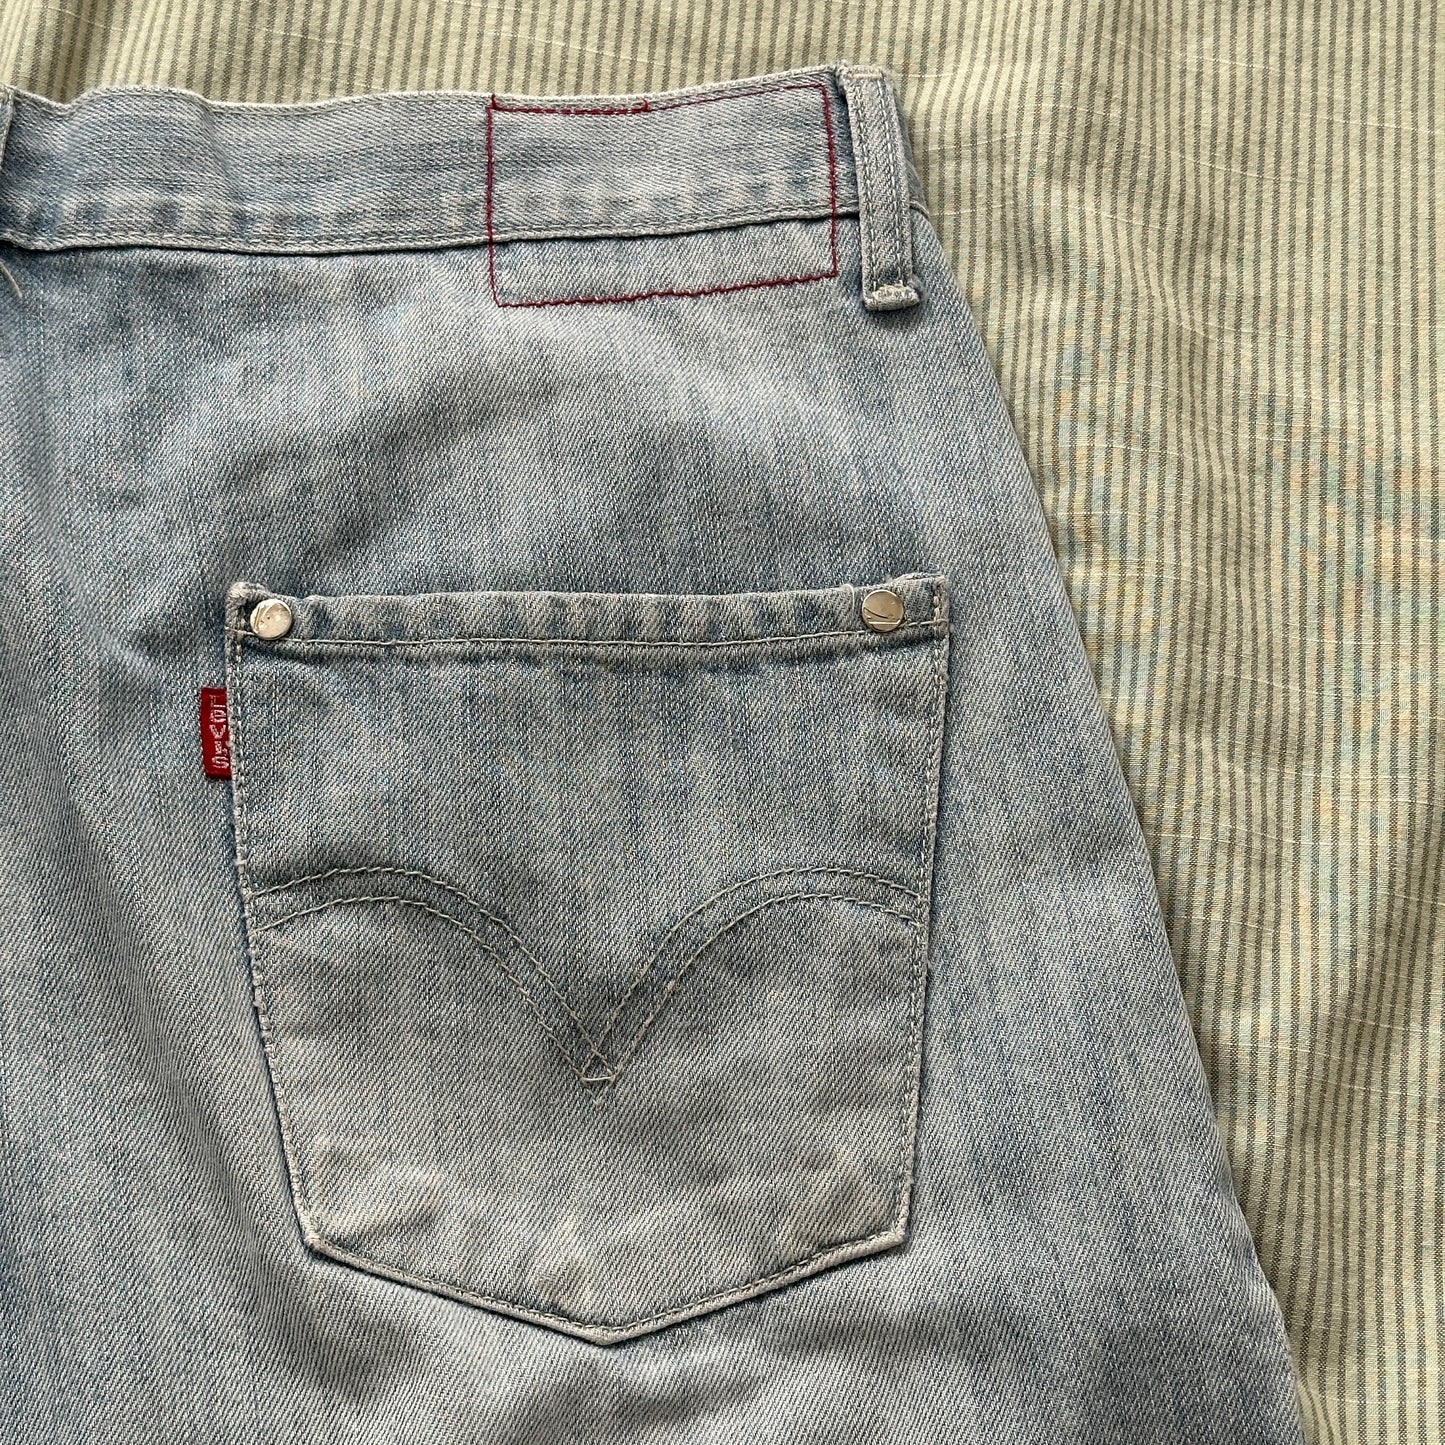 Levi's Engineered Jeans Shorts